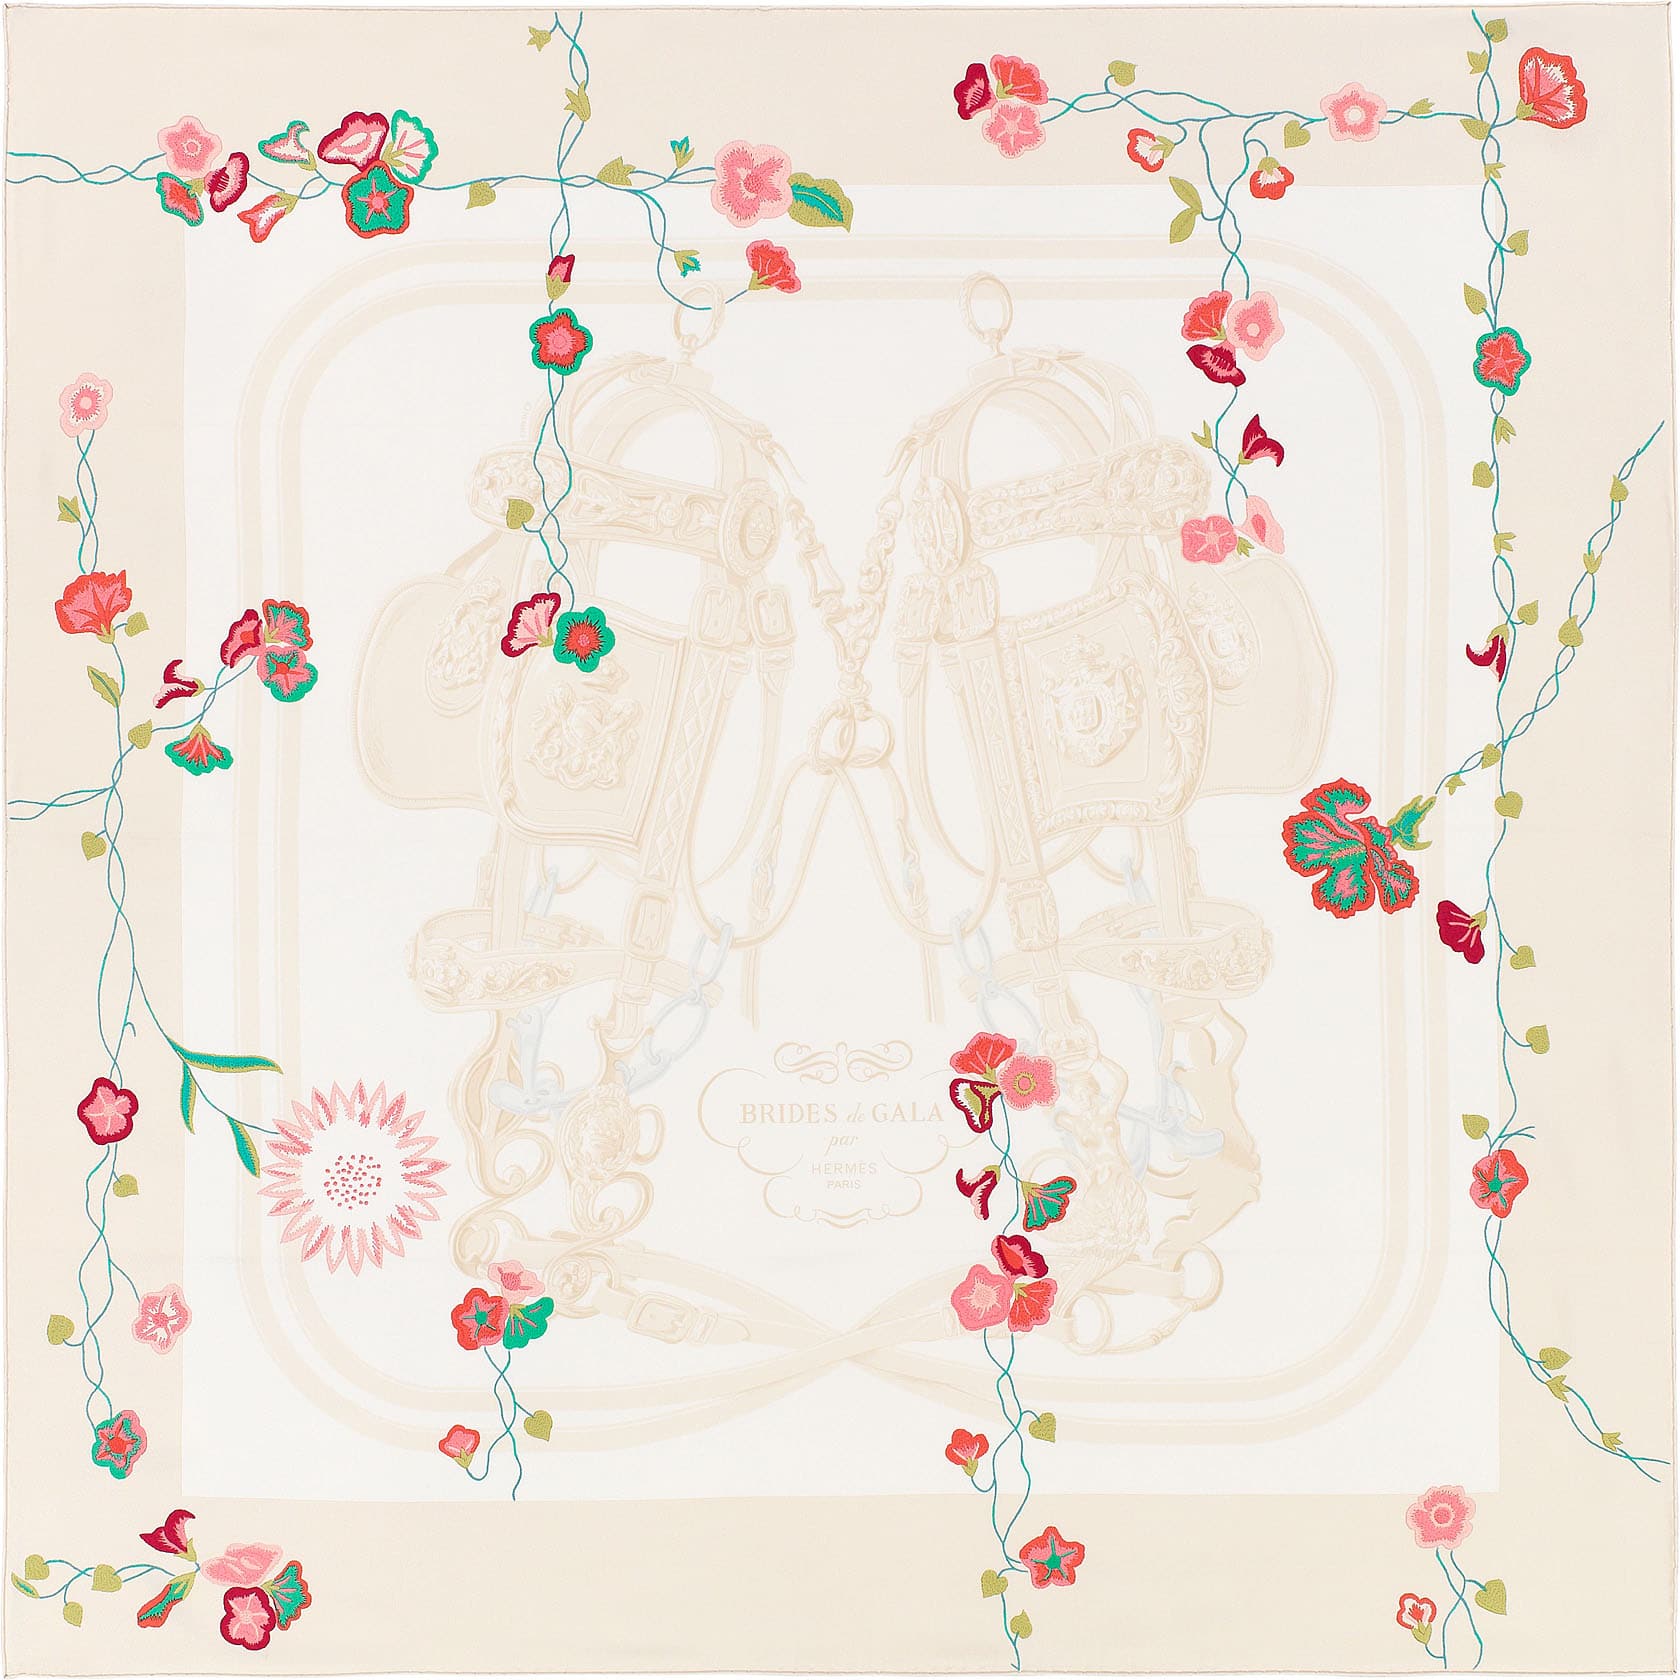 Every Season Hermes reinvents its Classics – The World of Hermes© Scarves